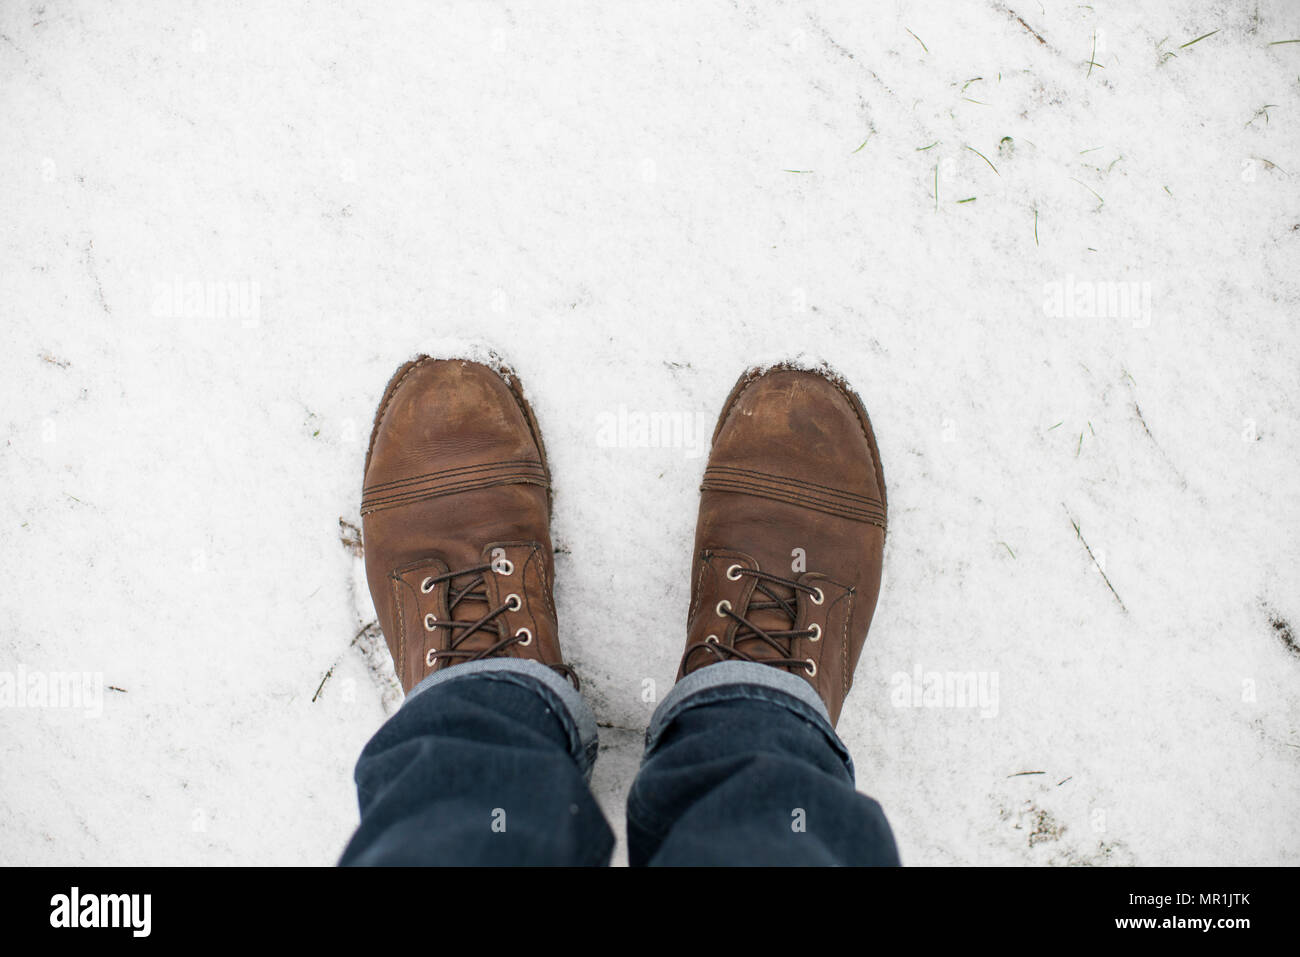 Feet of a man wearing Red Wing work boots and blue jeans standing in snow. Stock Photo